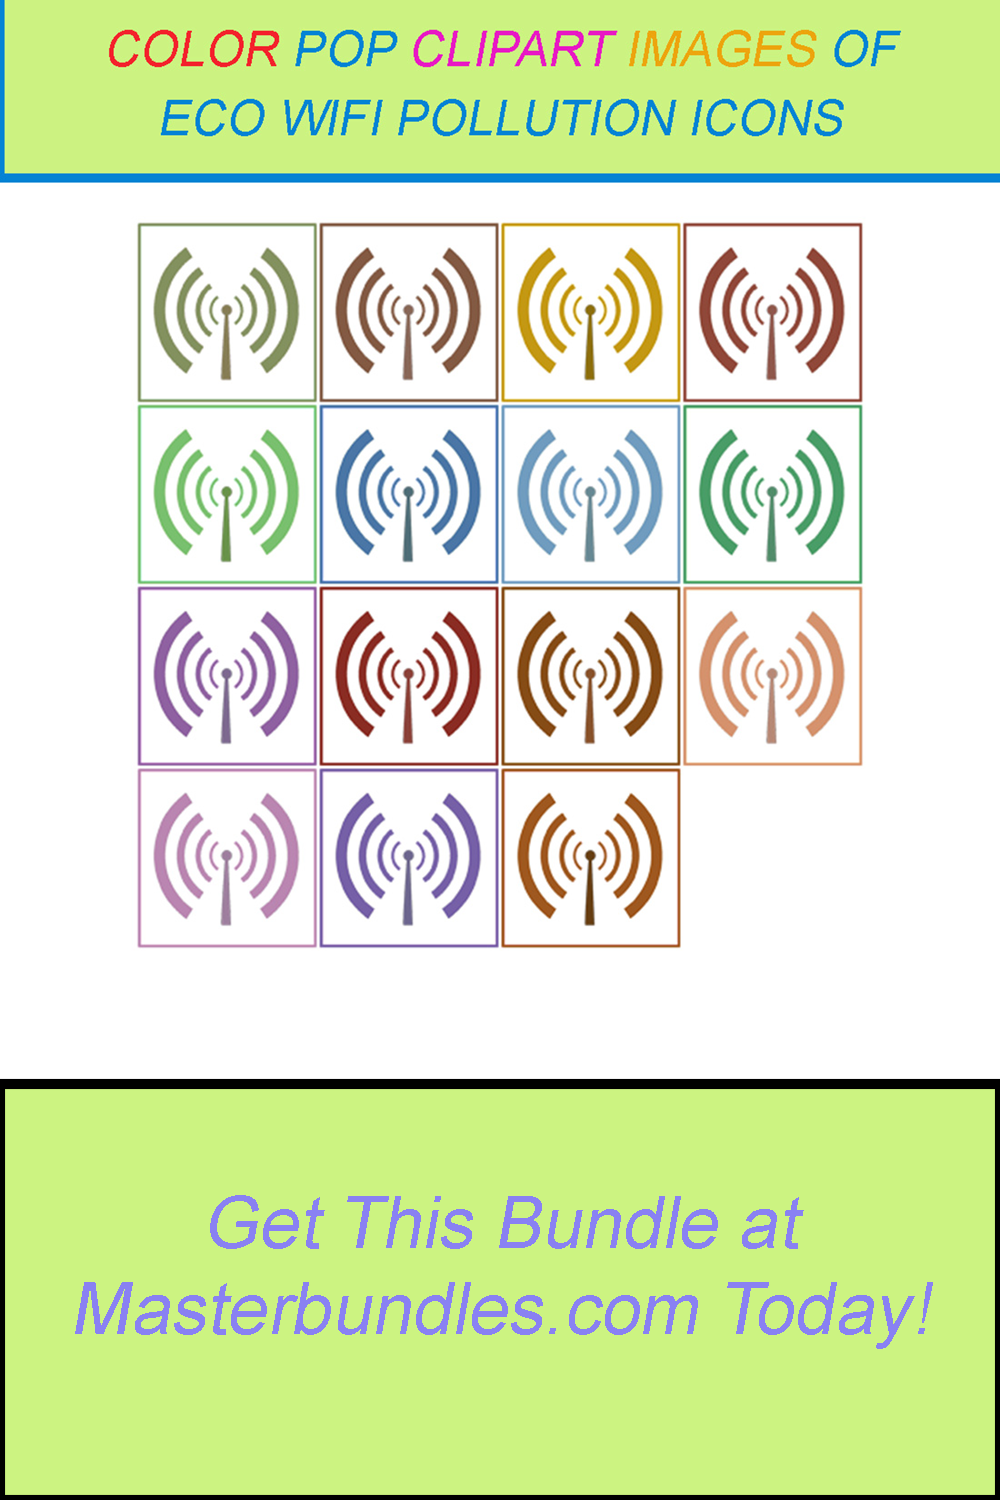 15 COLOR POP CLIPART IMAGES OF ECO WIFI POLLUTION ICONS pinterest preview image.